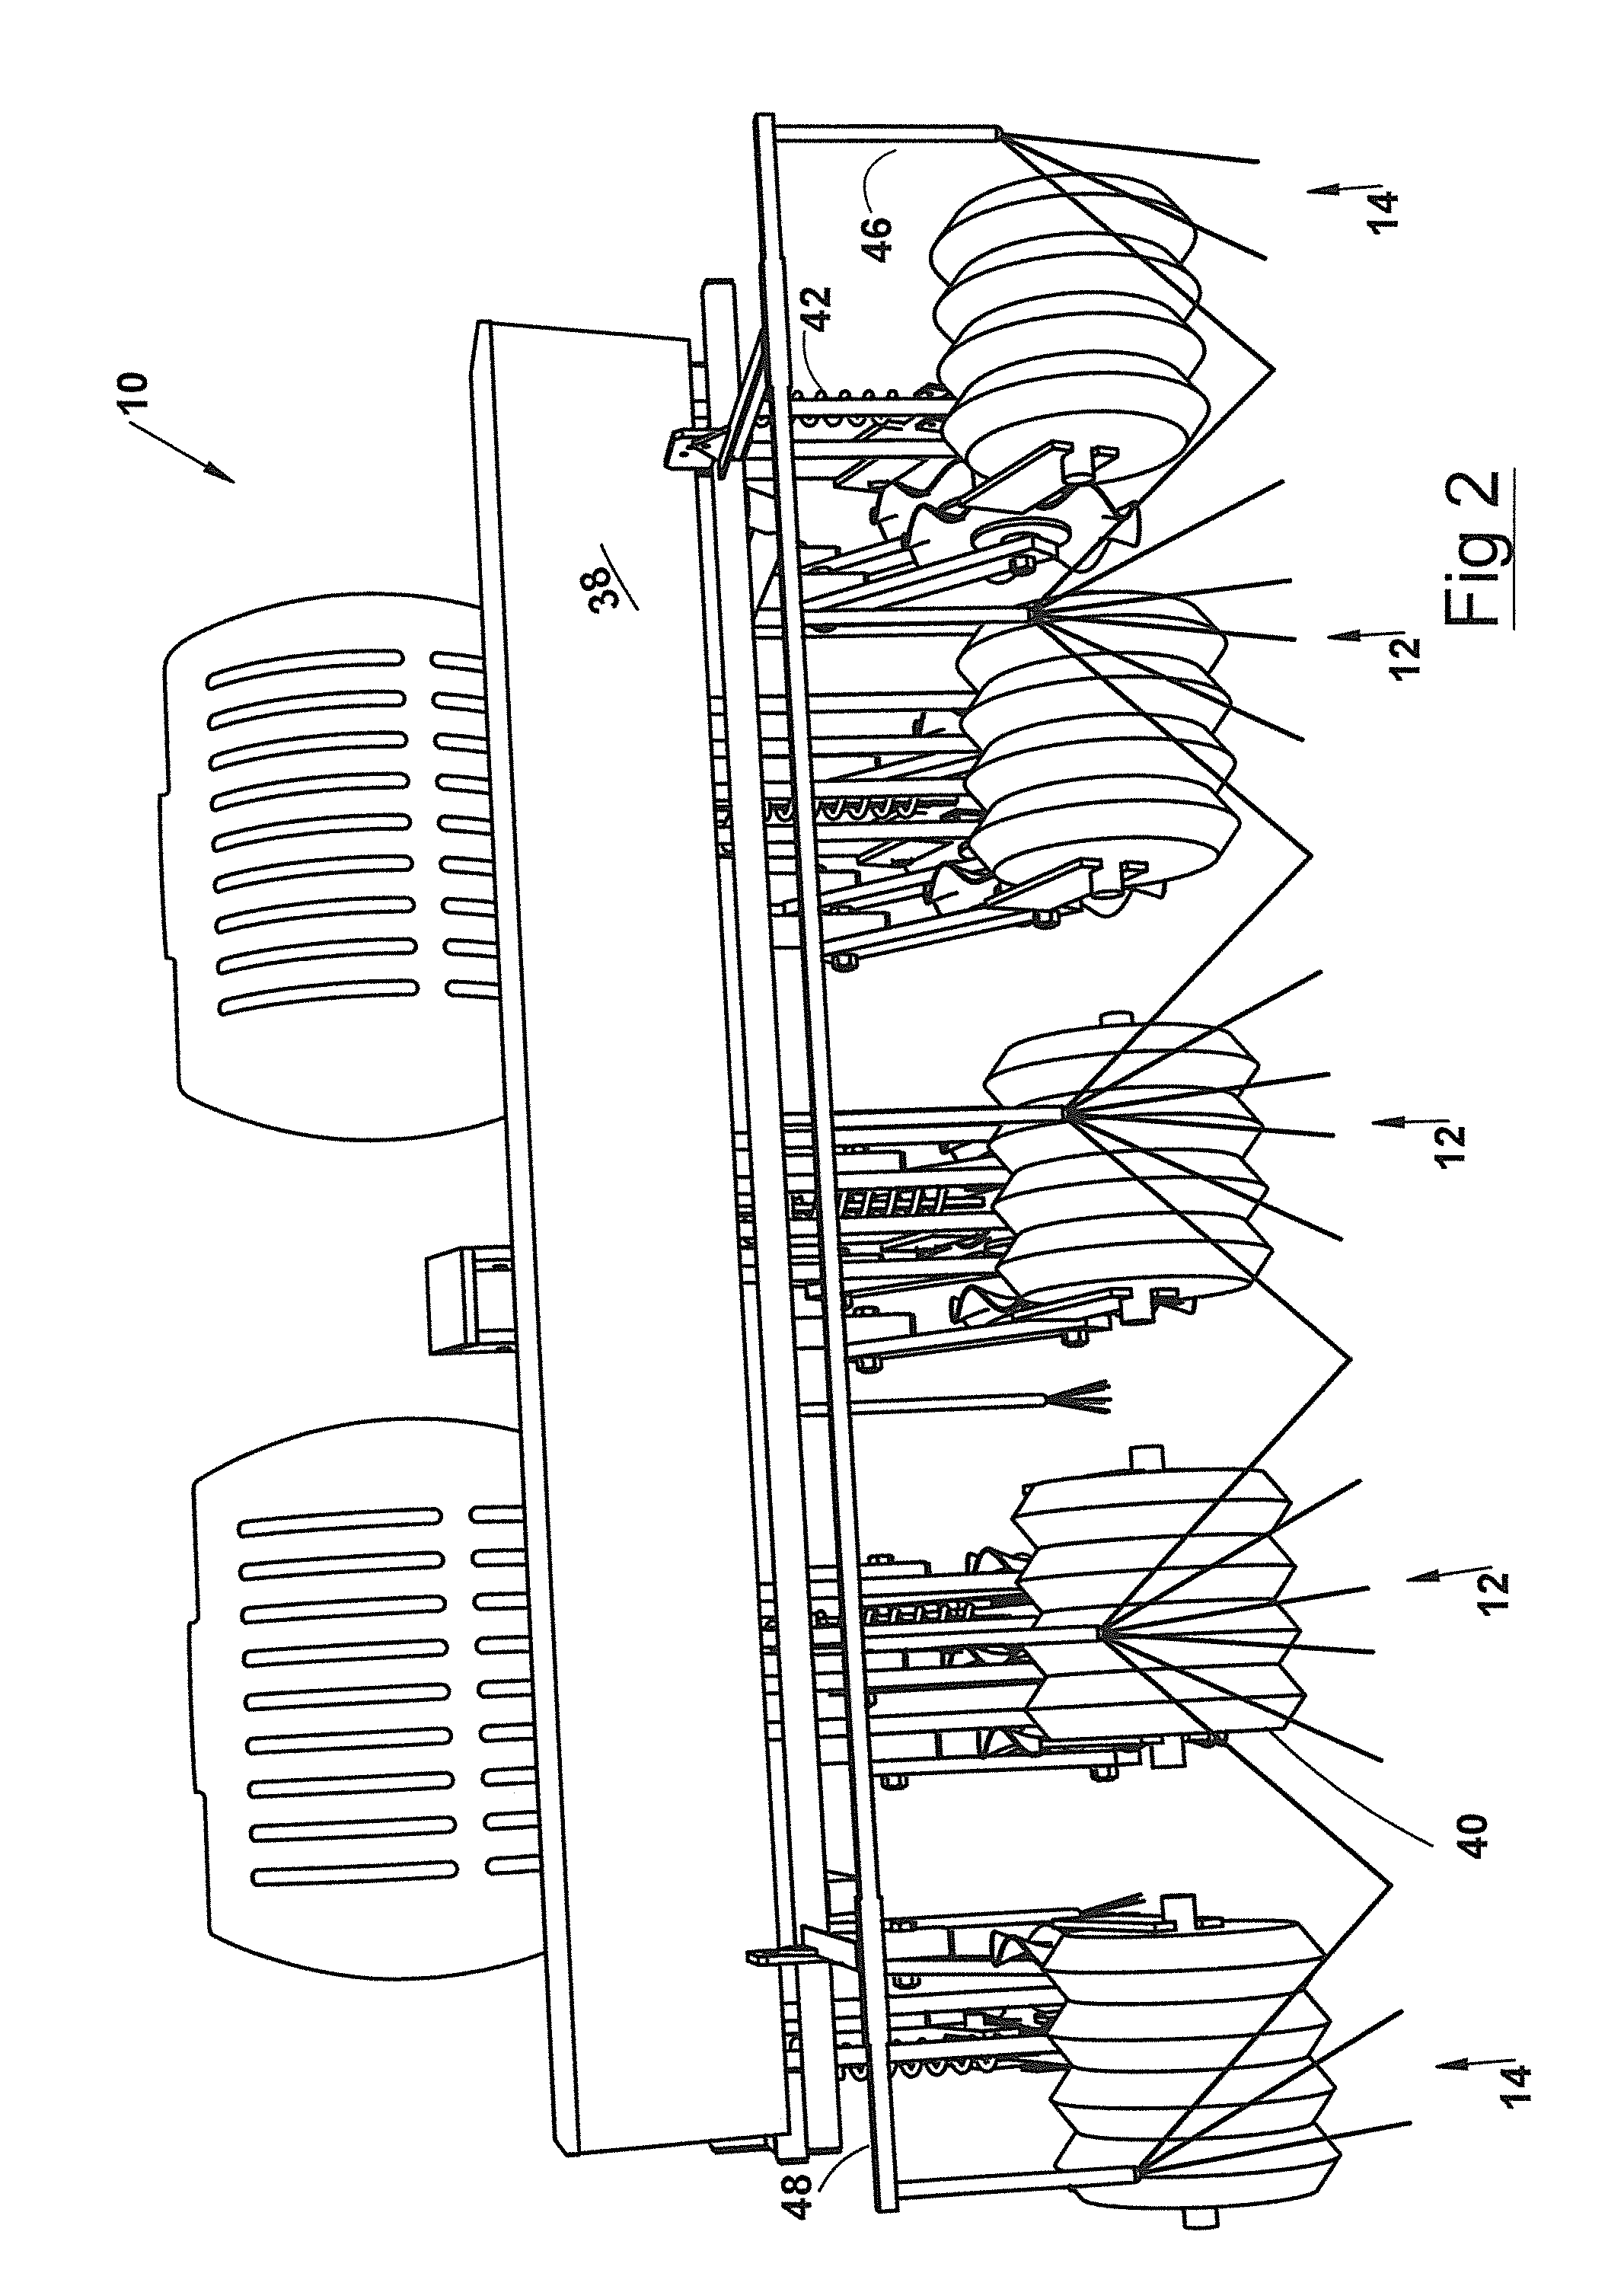 Apparatus and method for no-till inter-row simultaneous application of herbicide and fertilizer, soil preparation, and seeding of a cover crop in a standing crop